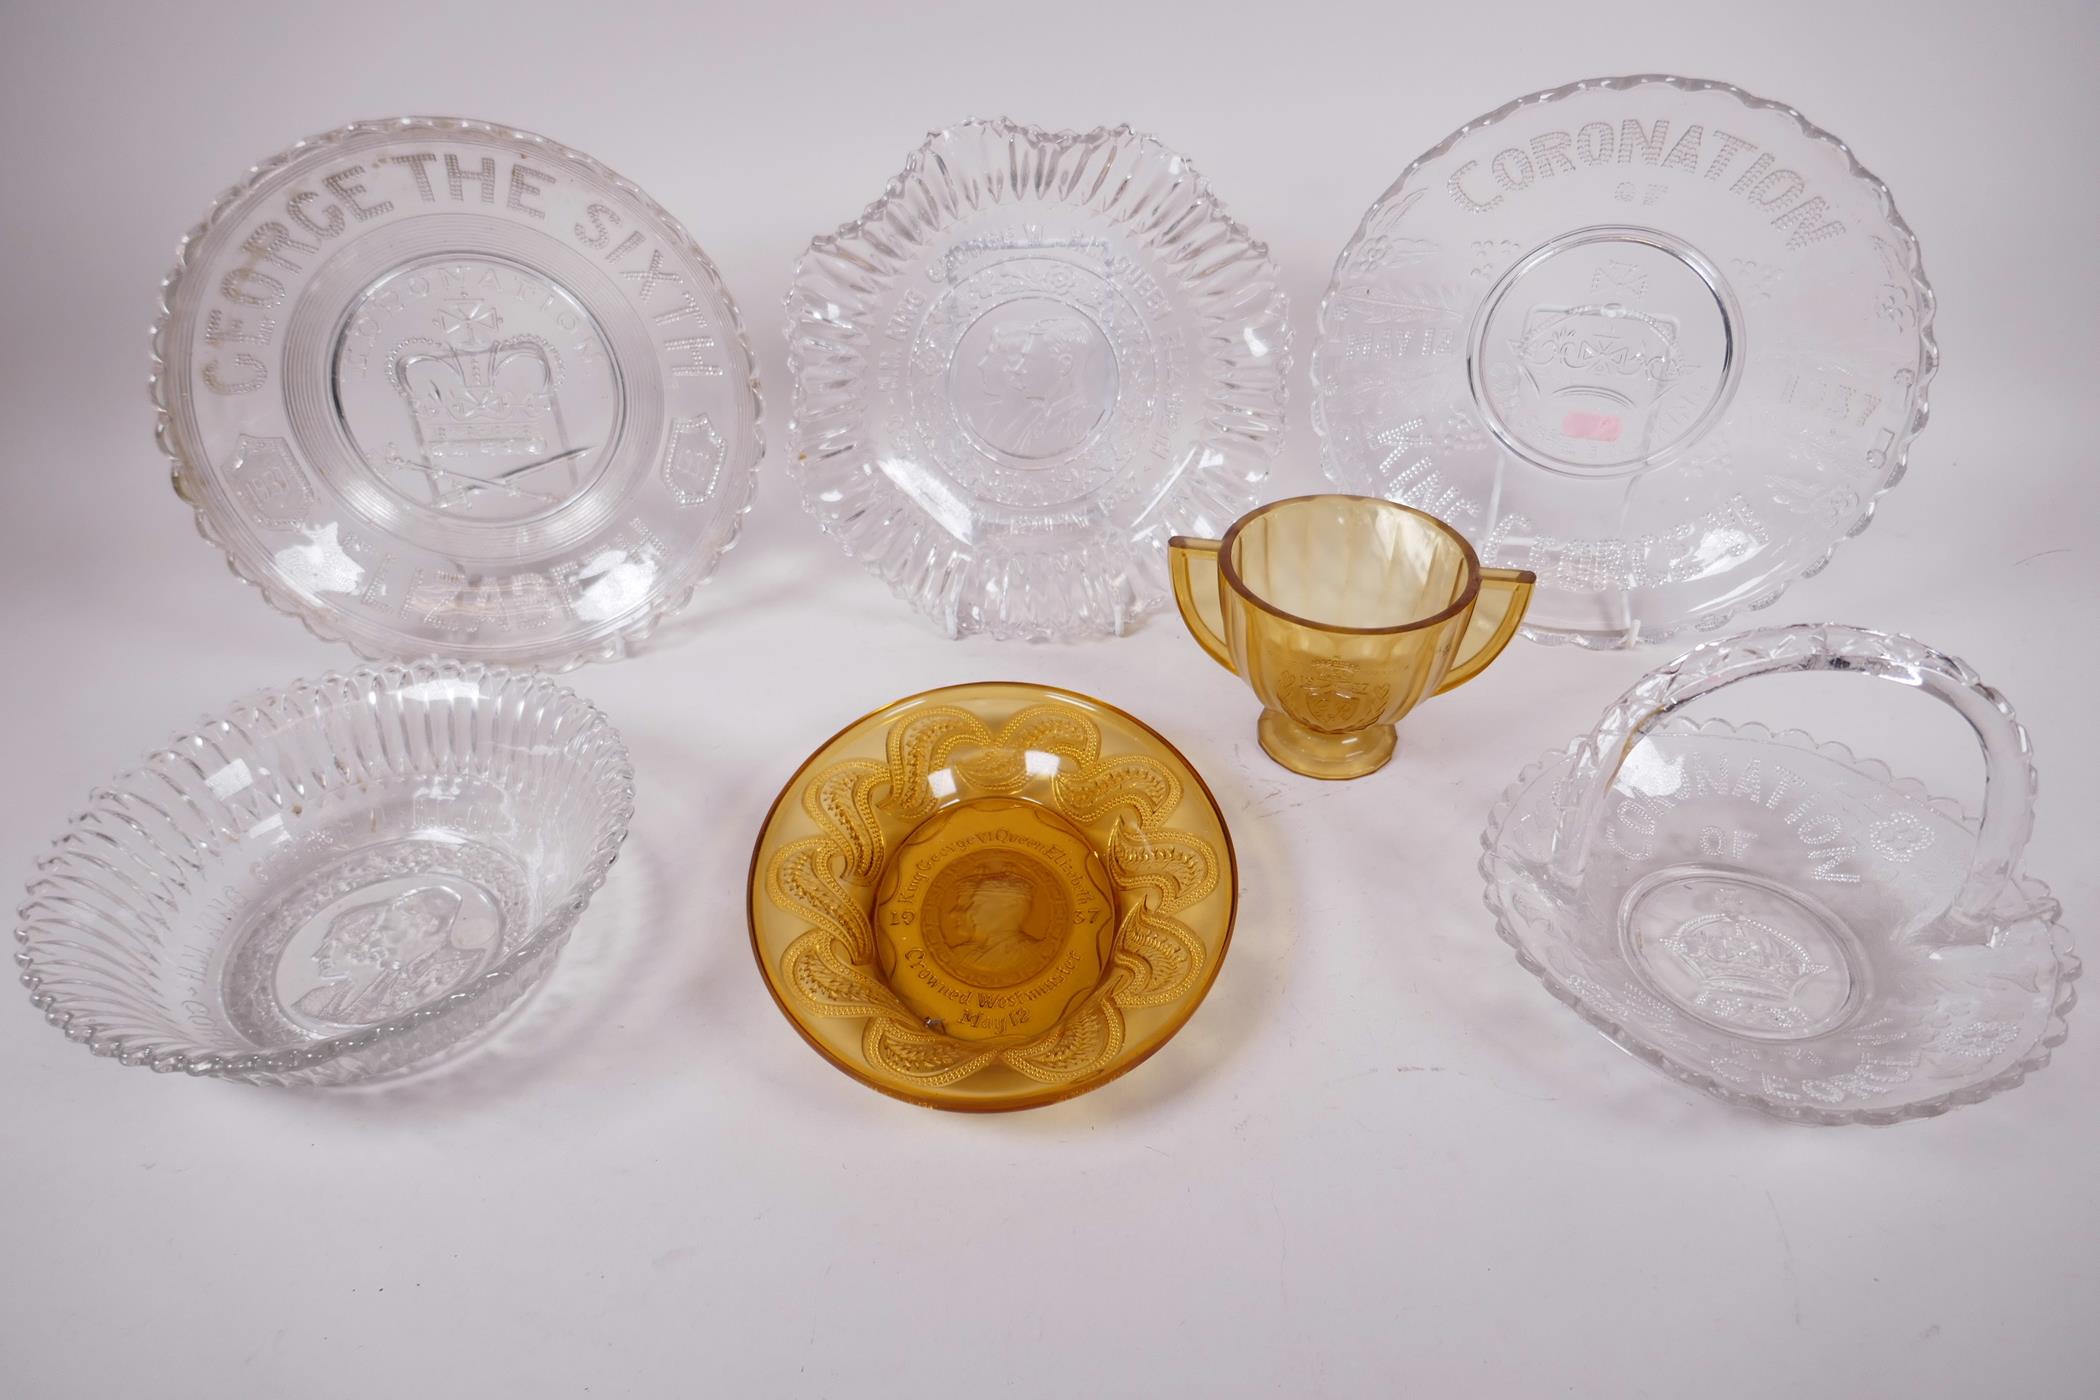 A collection of seven 1937 commemorative coronation pressed glass vessels in both clear and amber